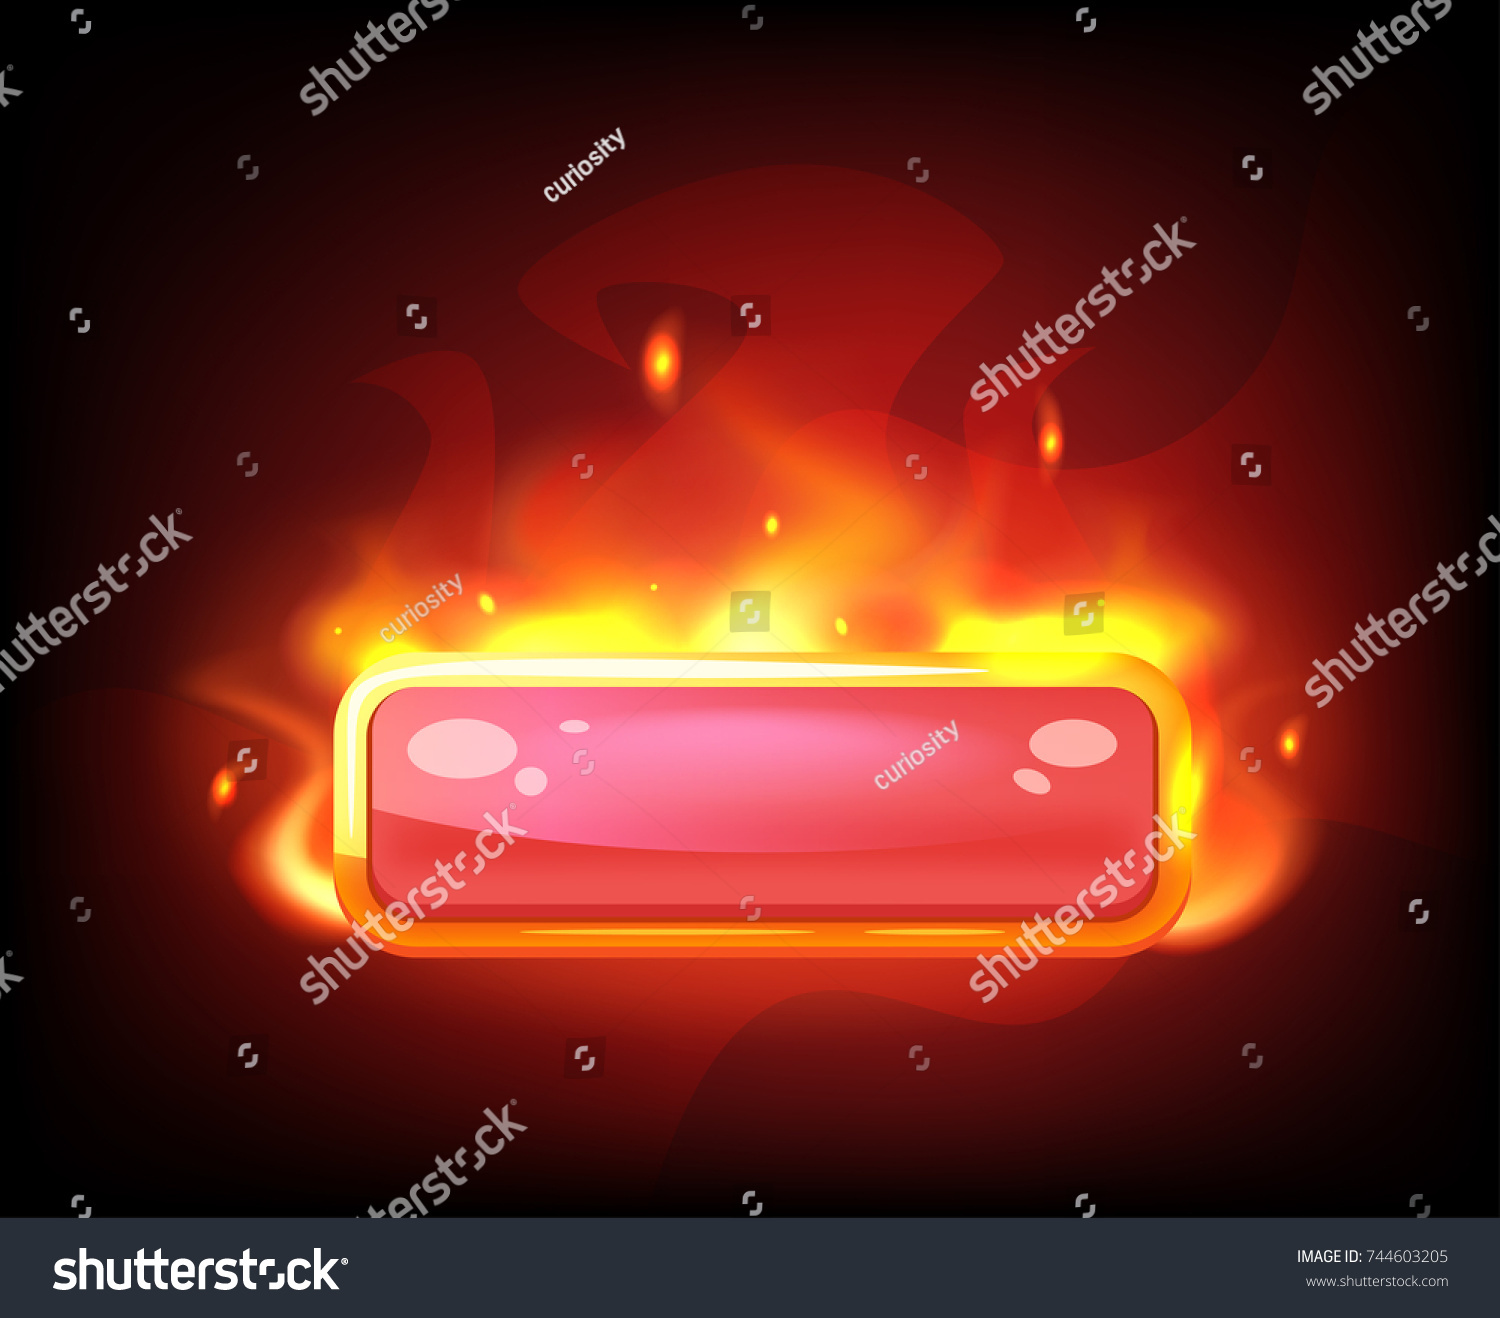 Vector cartoon style illustration of game long fiery red button. Game user interface (GUI) element for video games, computer or web design. Options selection window.  #744603205